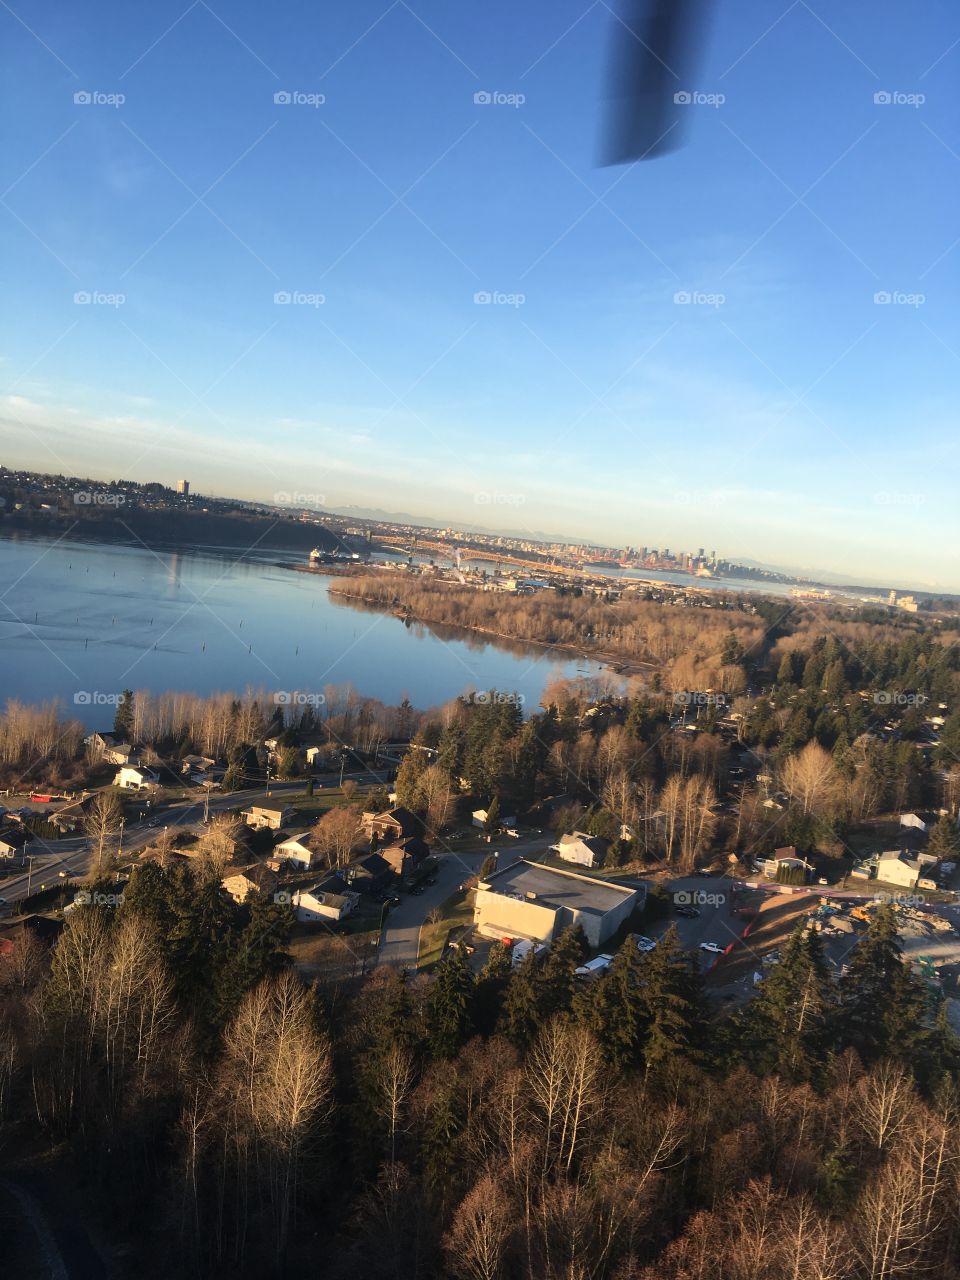  A view of Burrard Inlet via helicopter 